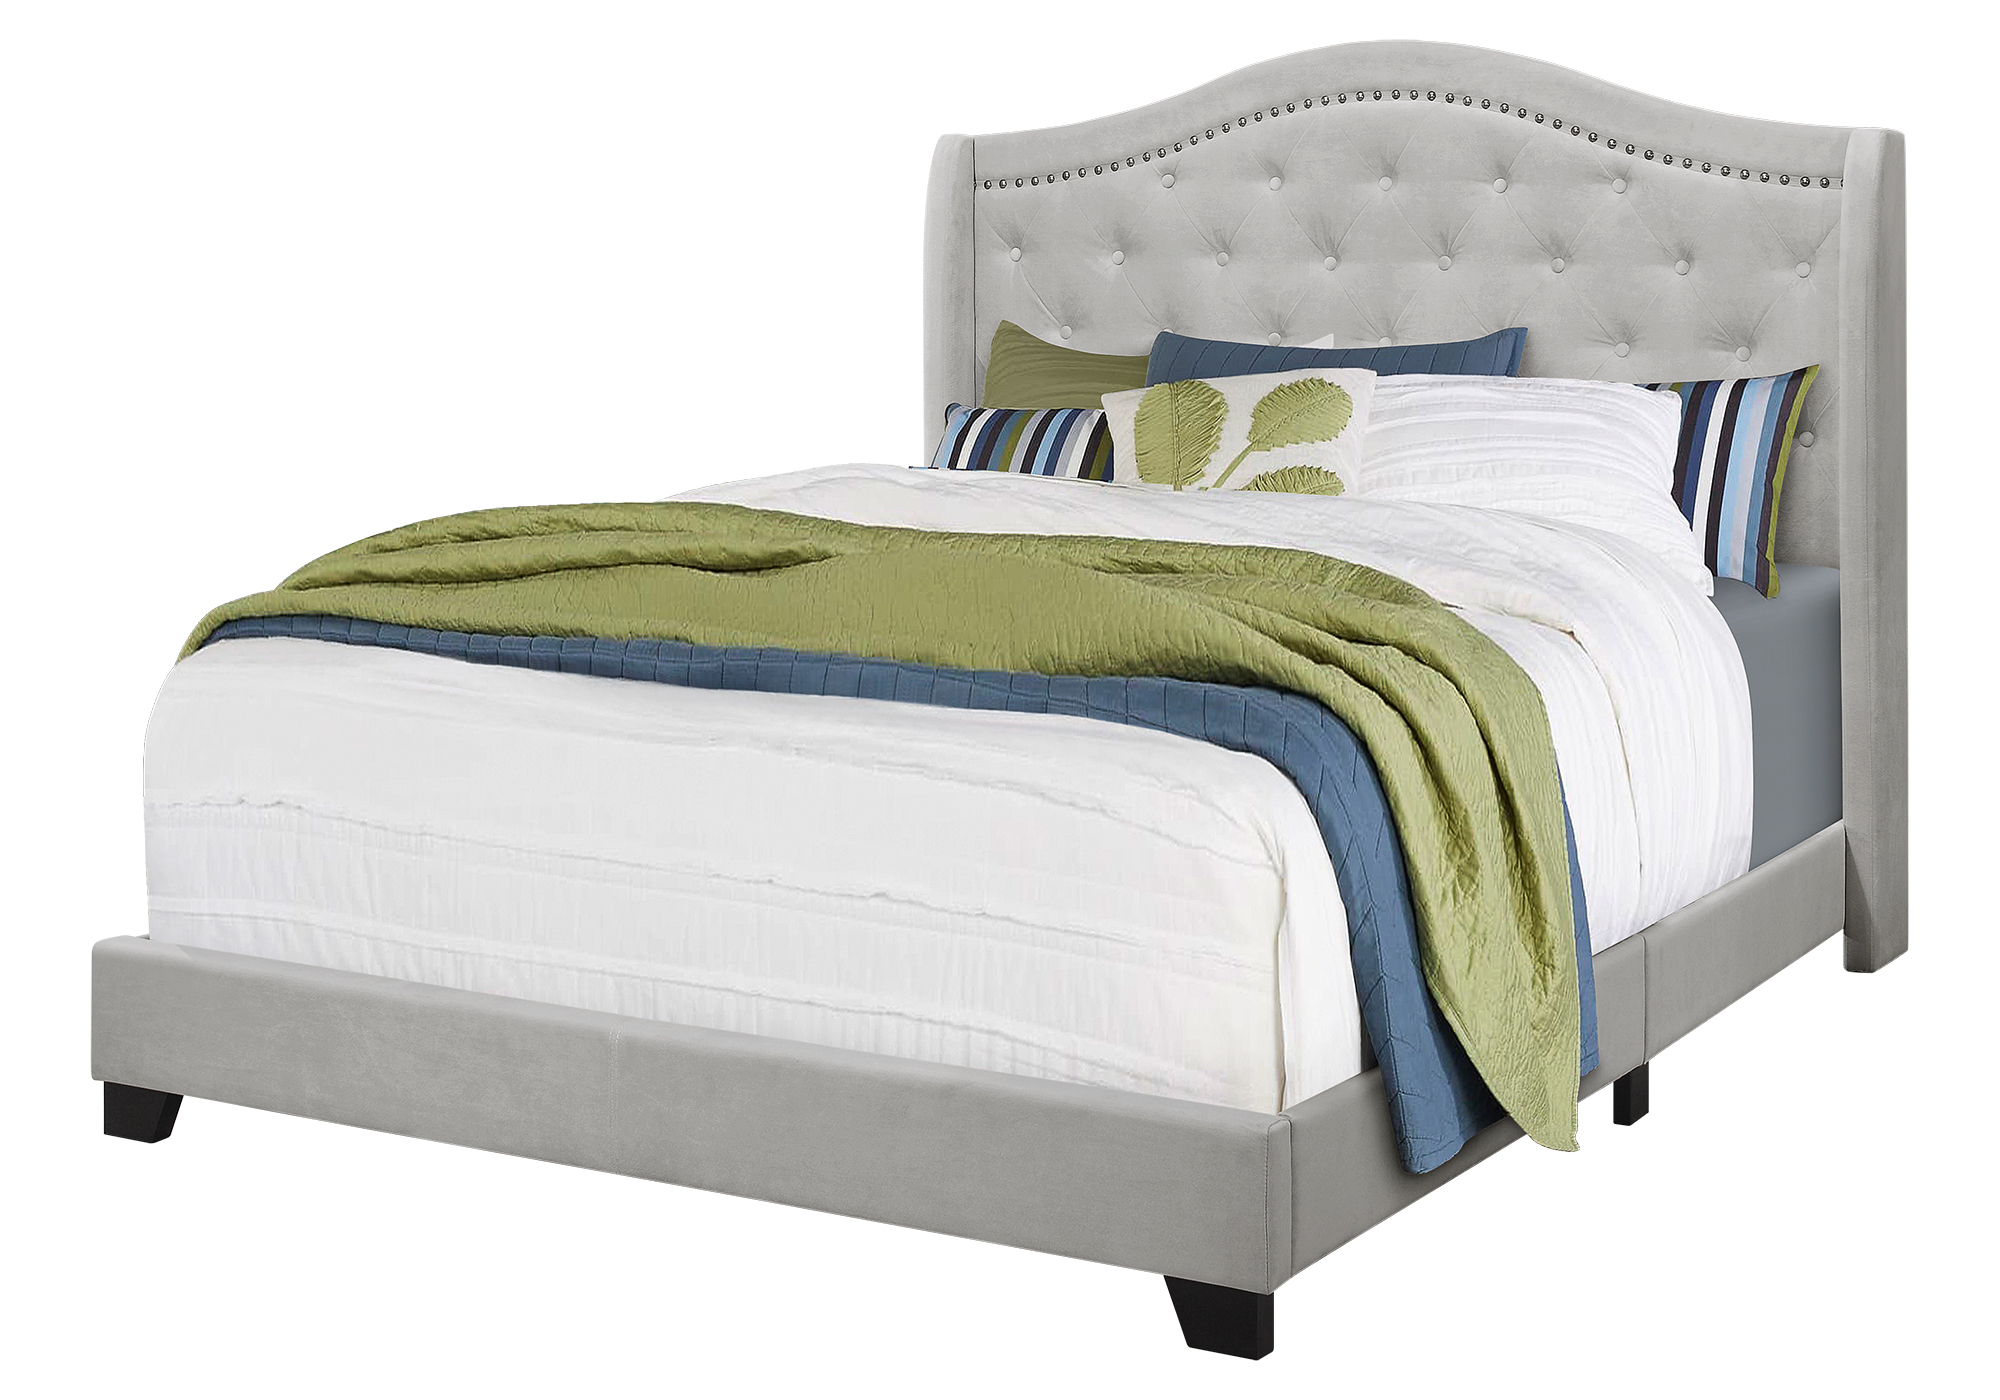 BED - QUEEN SIZE / LIGHT GREY VELVET WITH CHROME TRIM